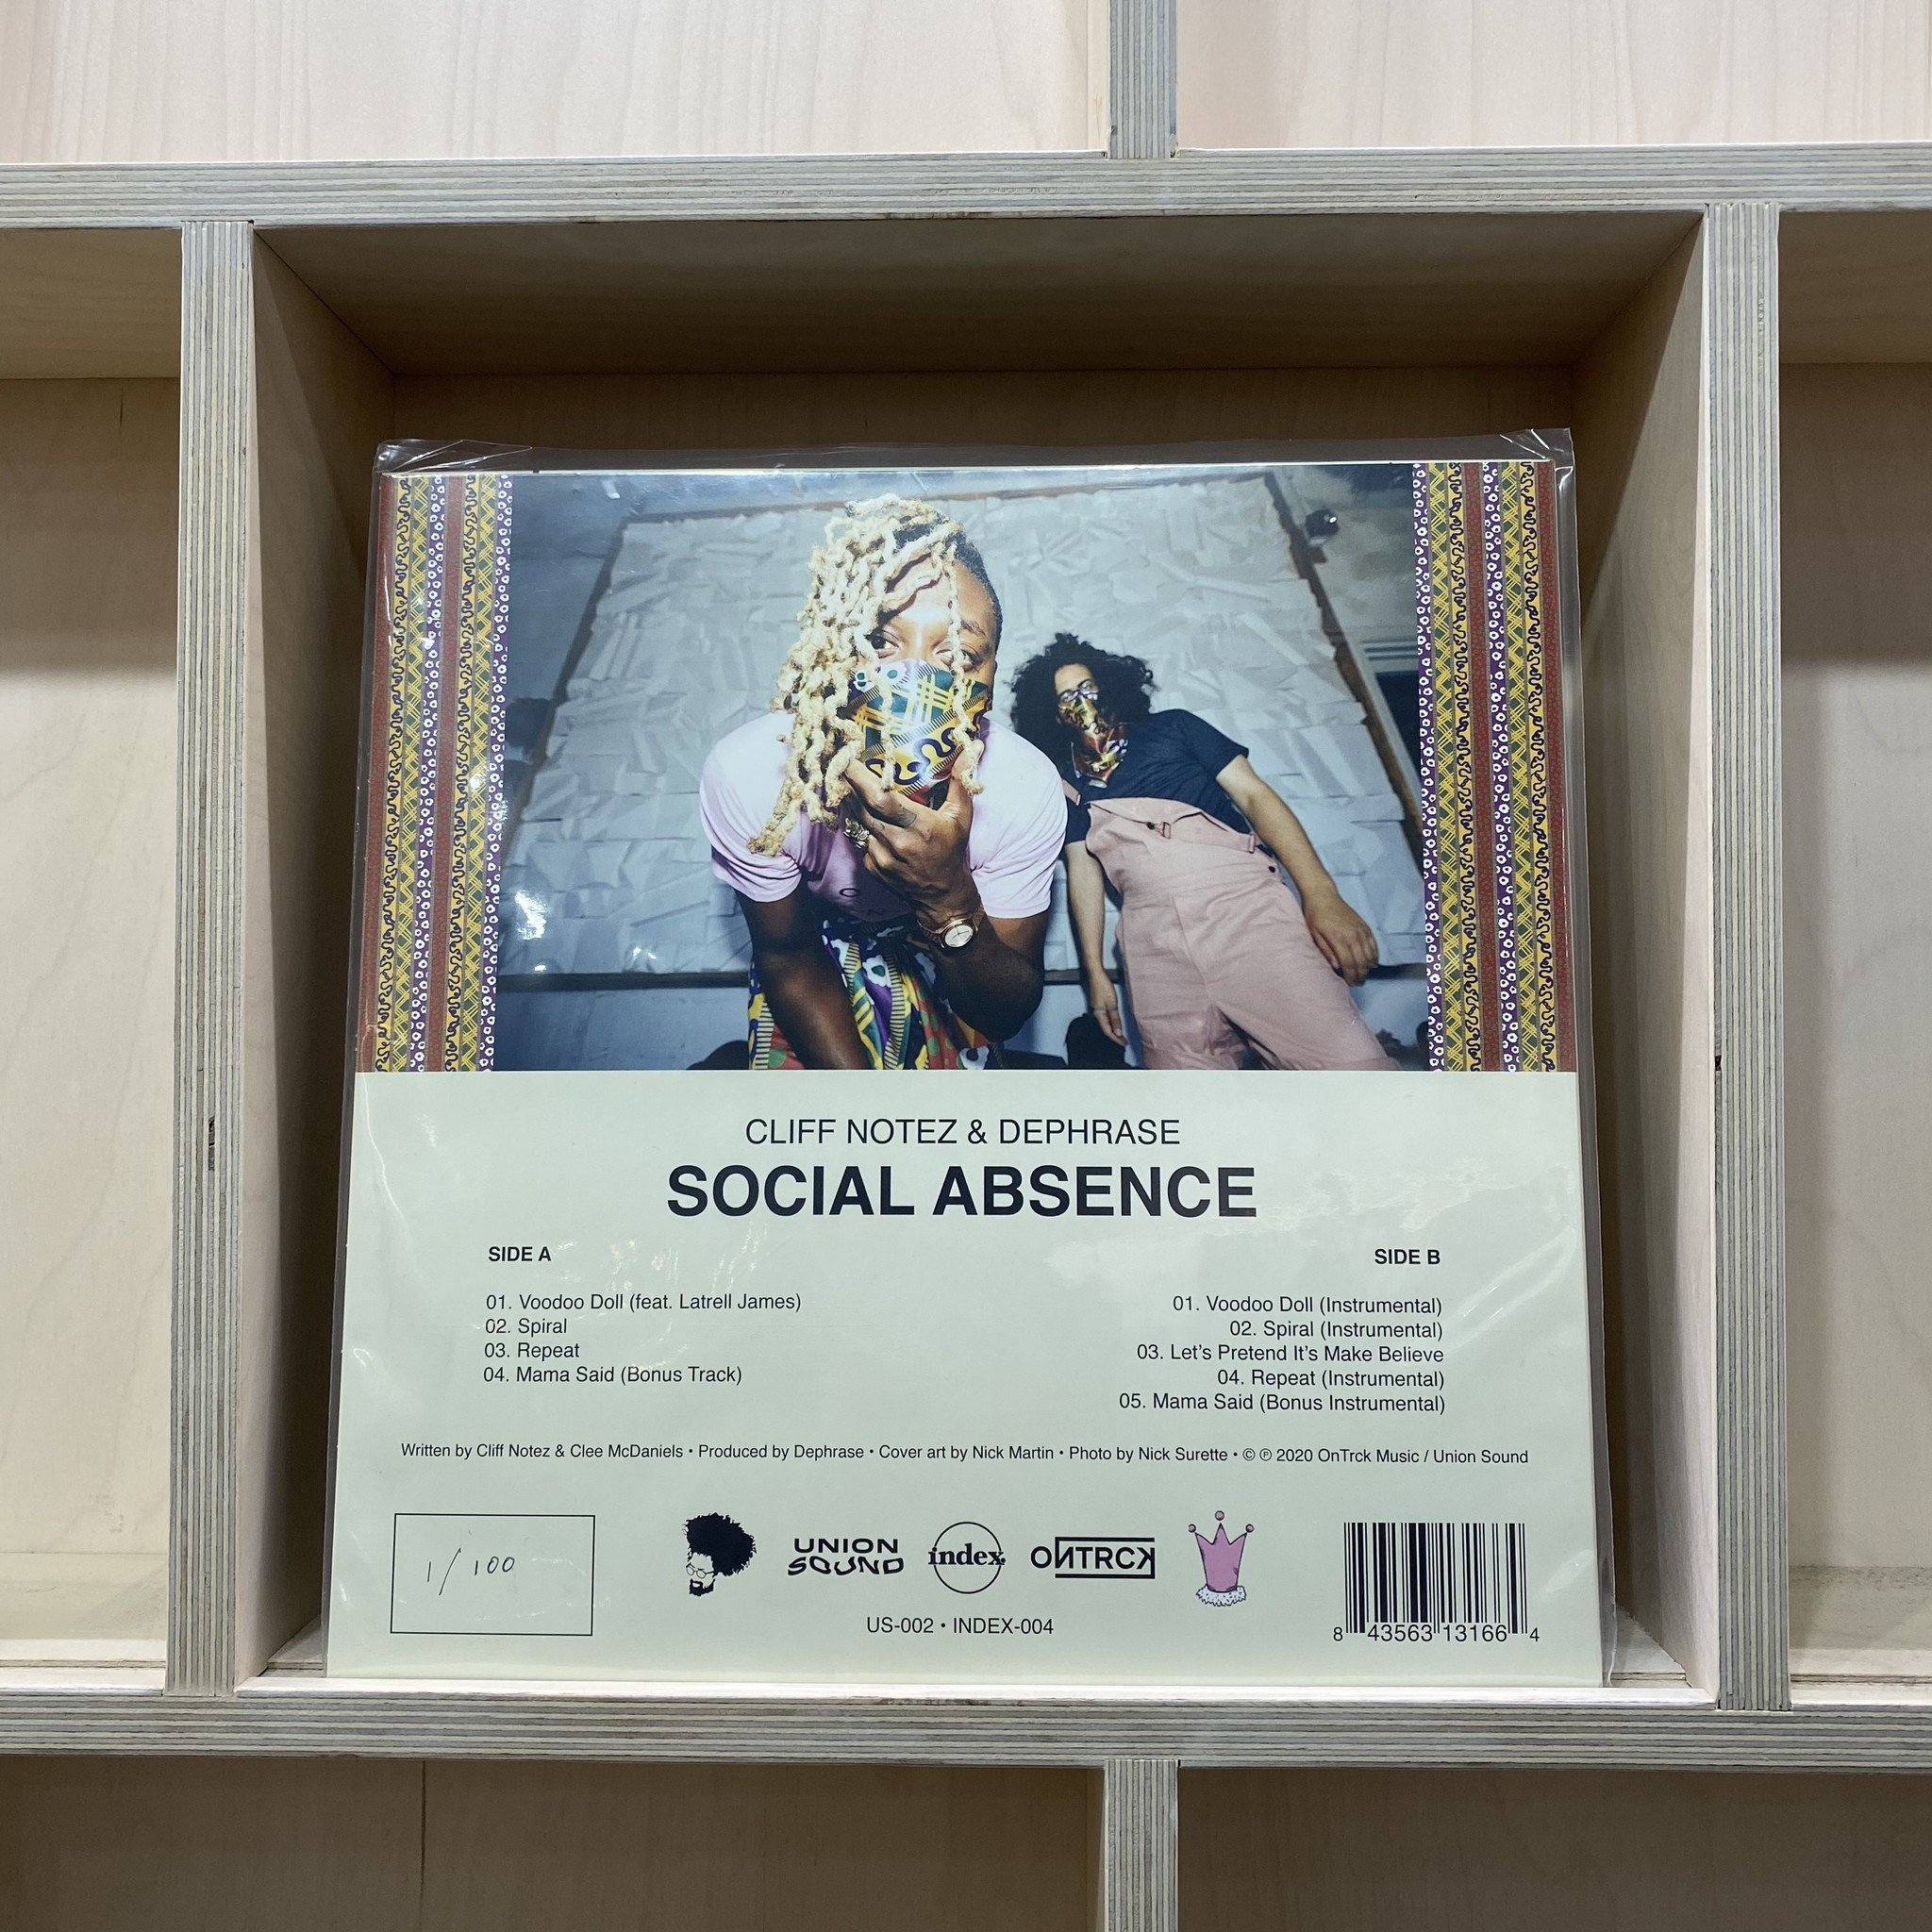 Cliff Notez & Dephrase - Social Absence - Vinyl, 12", EP, Limited Edition, White w/ Green, Yellow & Purple Splatter